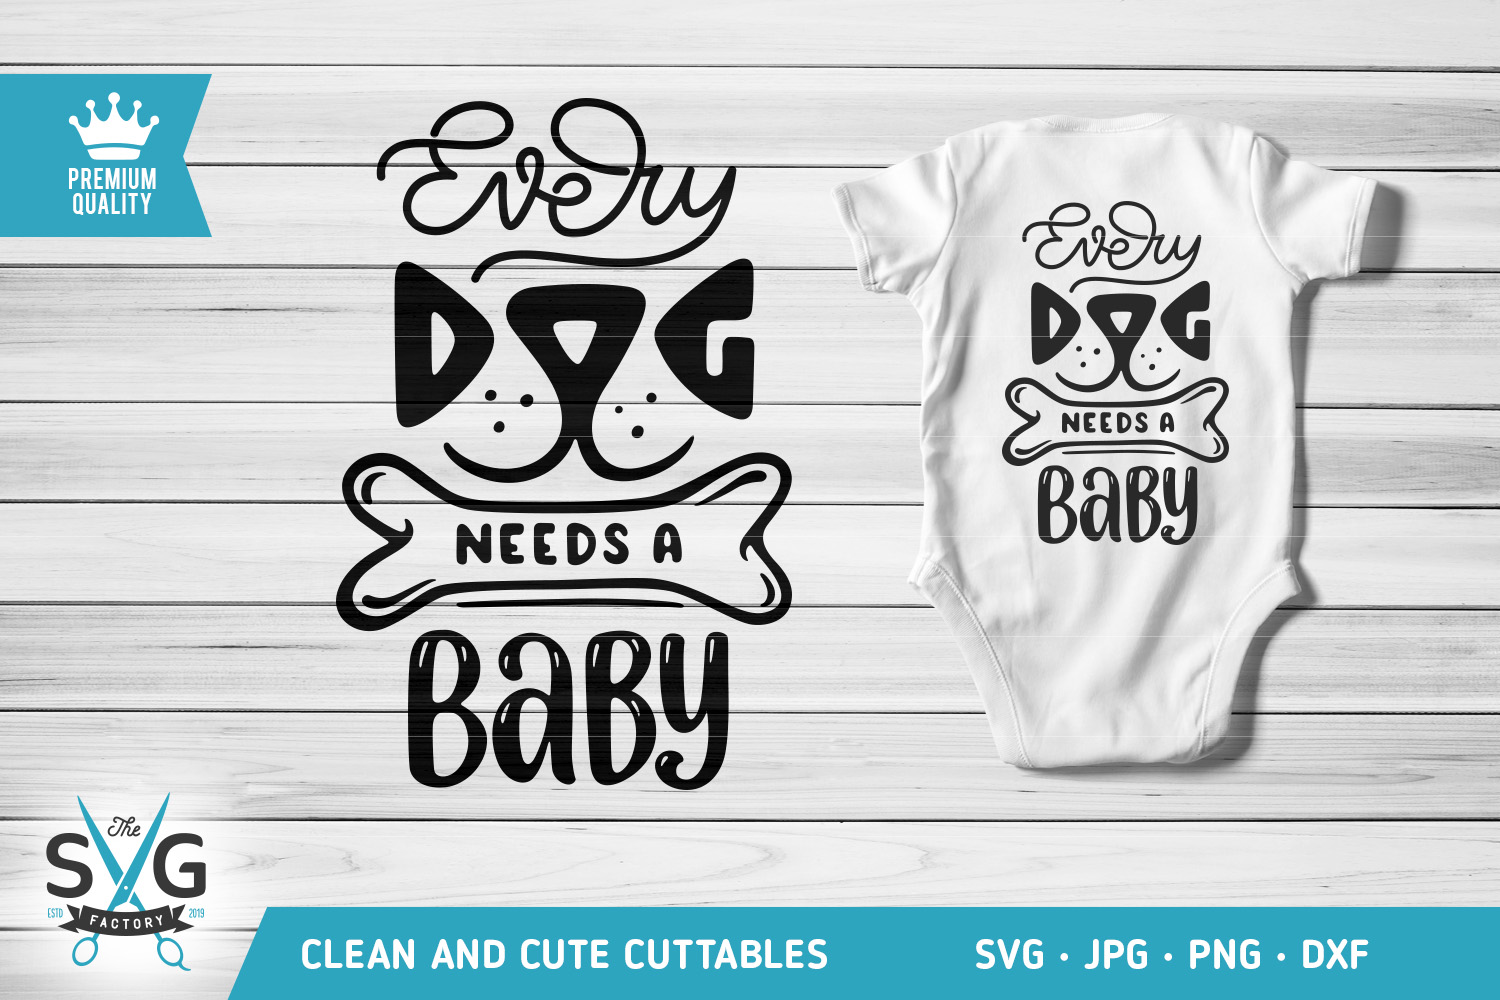 Every Dog Needs A Baby SVG cutting file